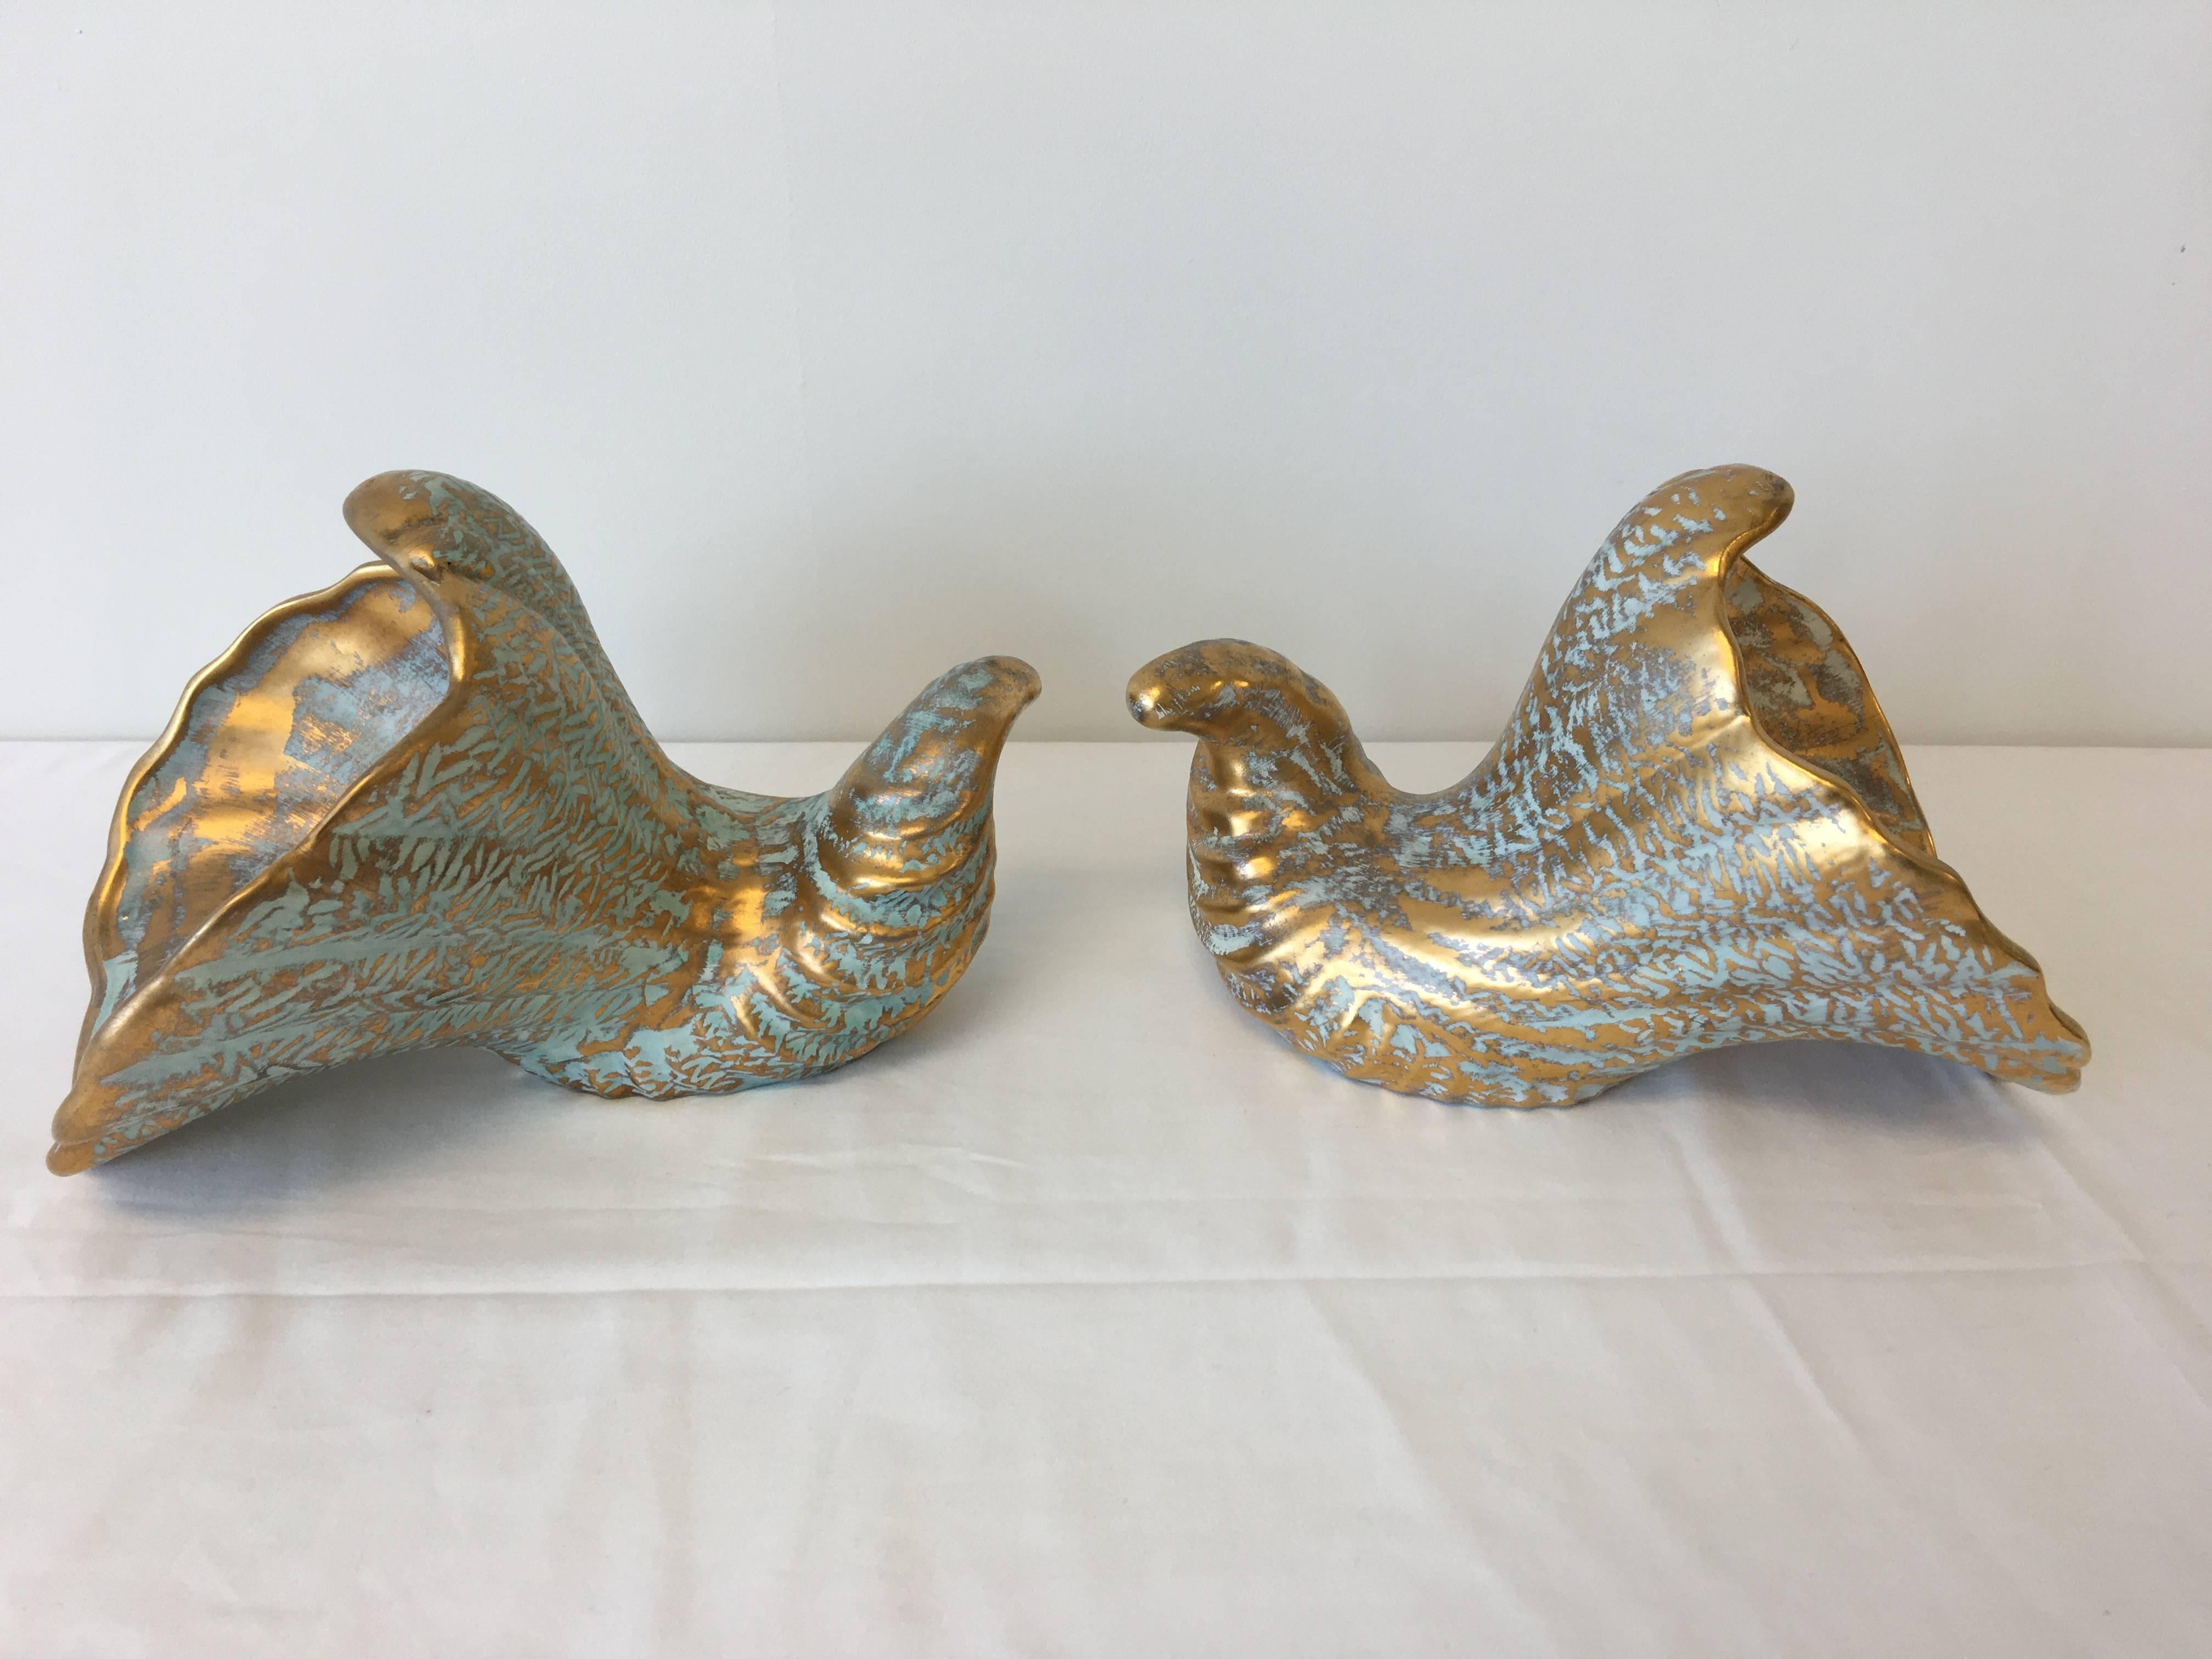 American 1970s Stangl Gold and Turquoise Cornucopia Serving Pieces, Pair